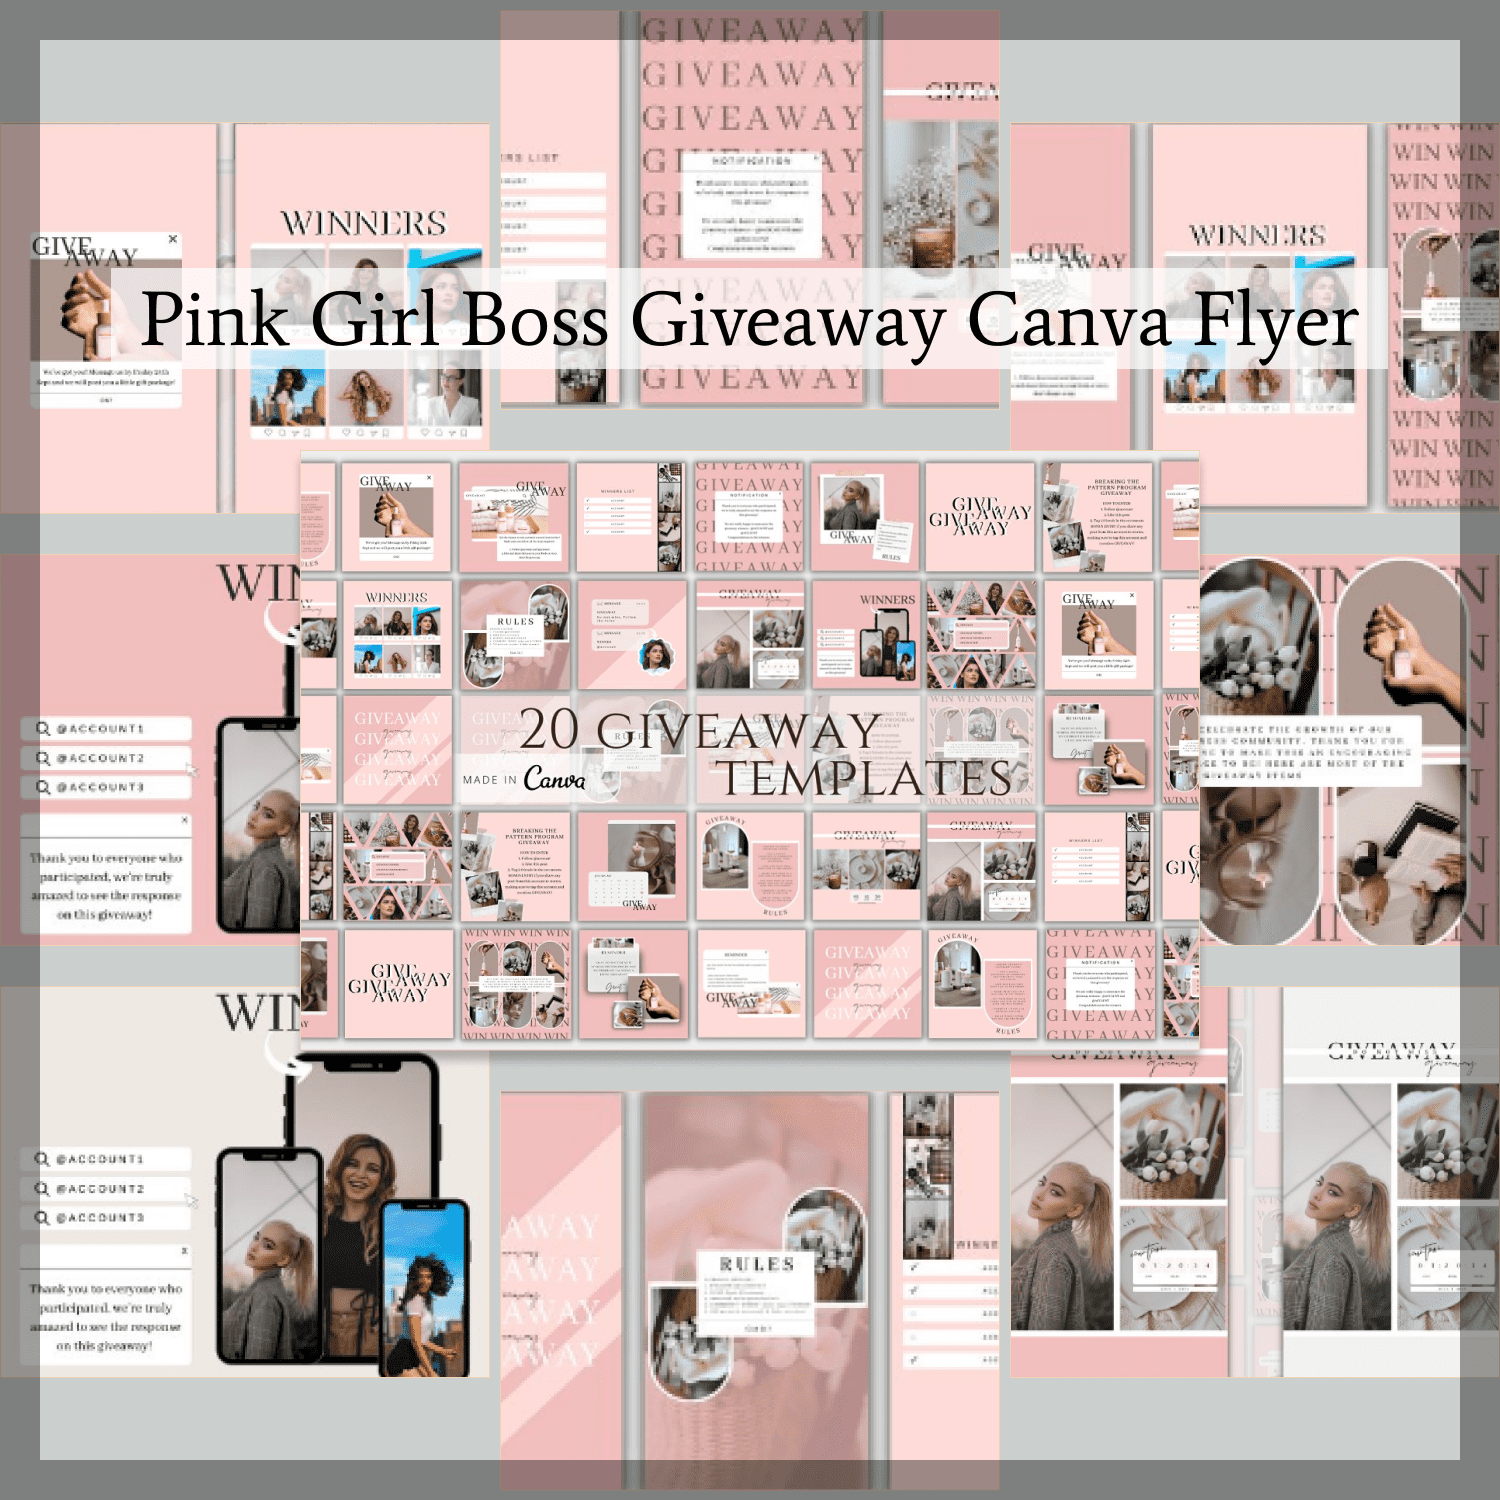 Pink Girl Boss Giveaway Canva Flyer cover image.